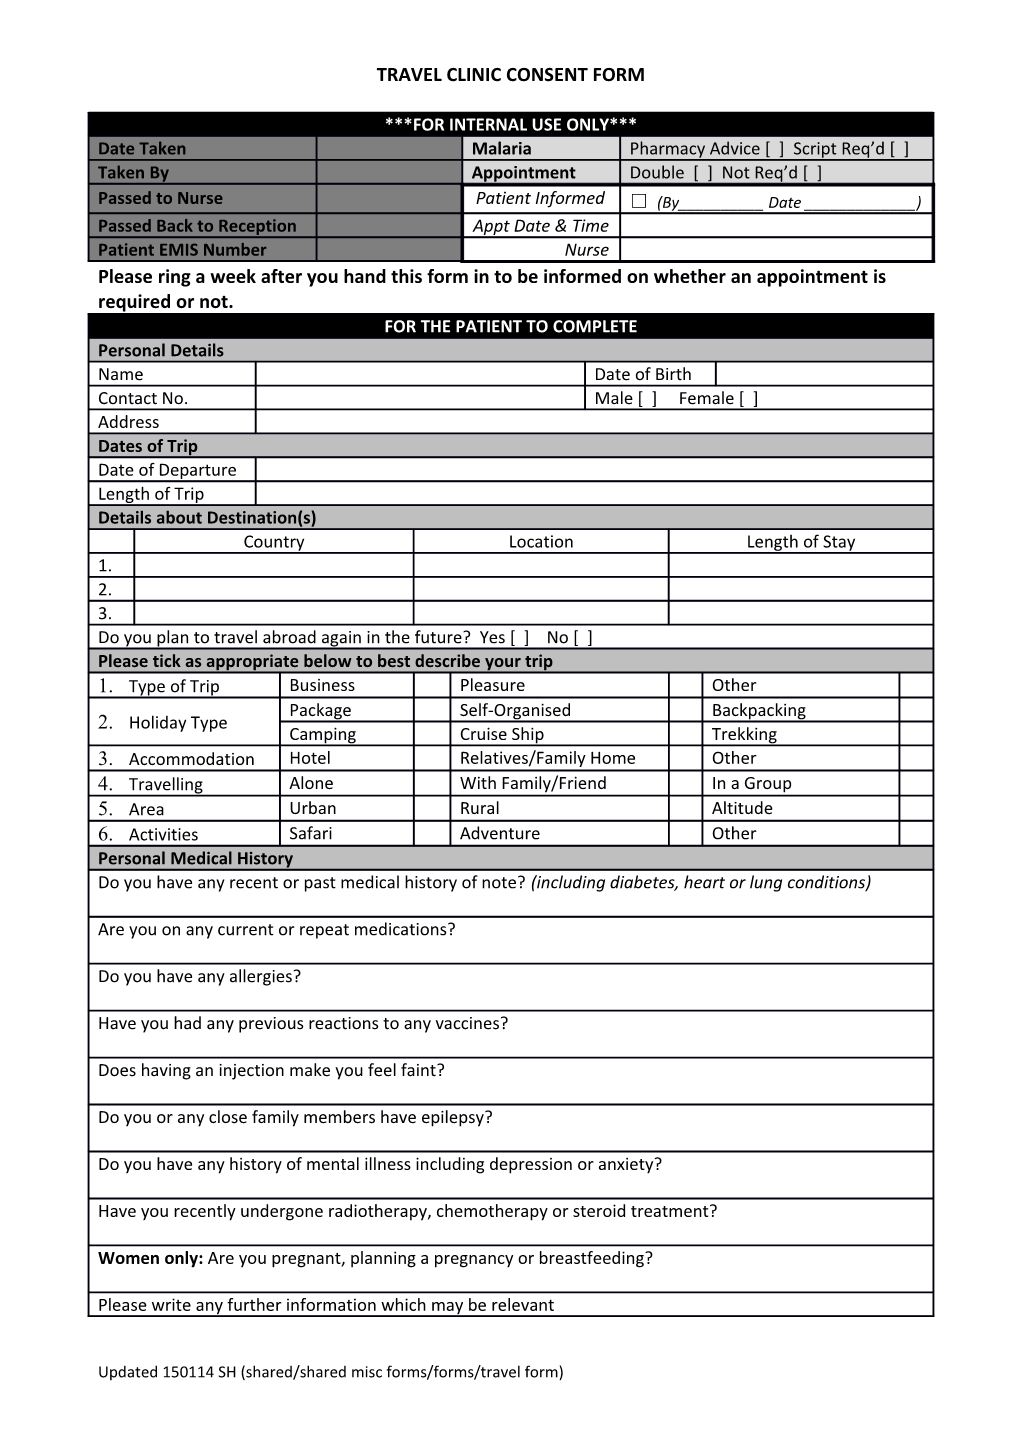 Travel Clinic Consent Form